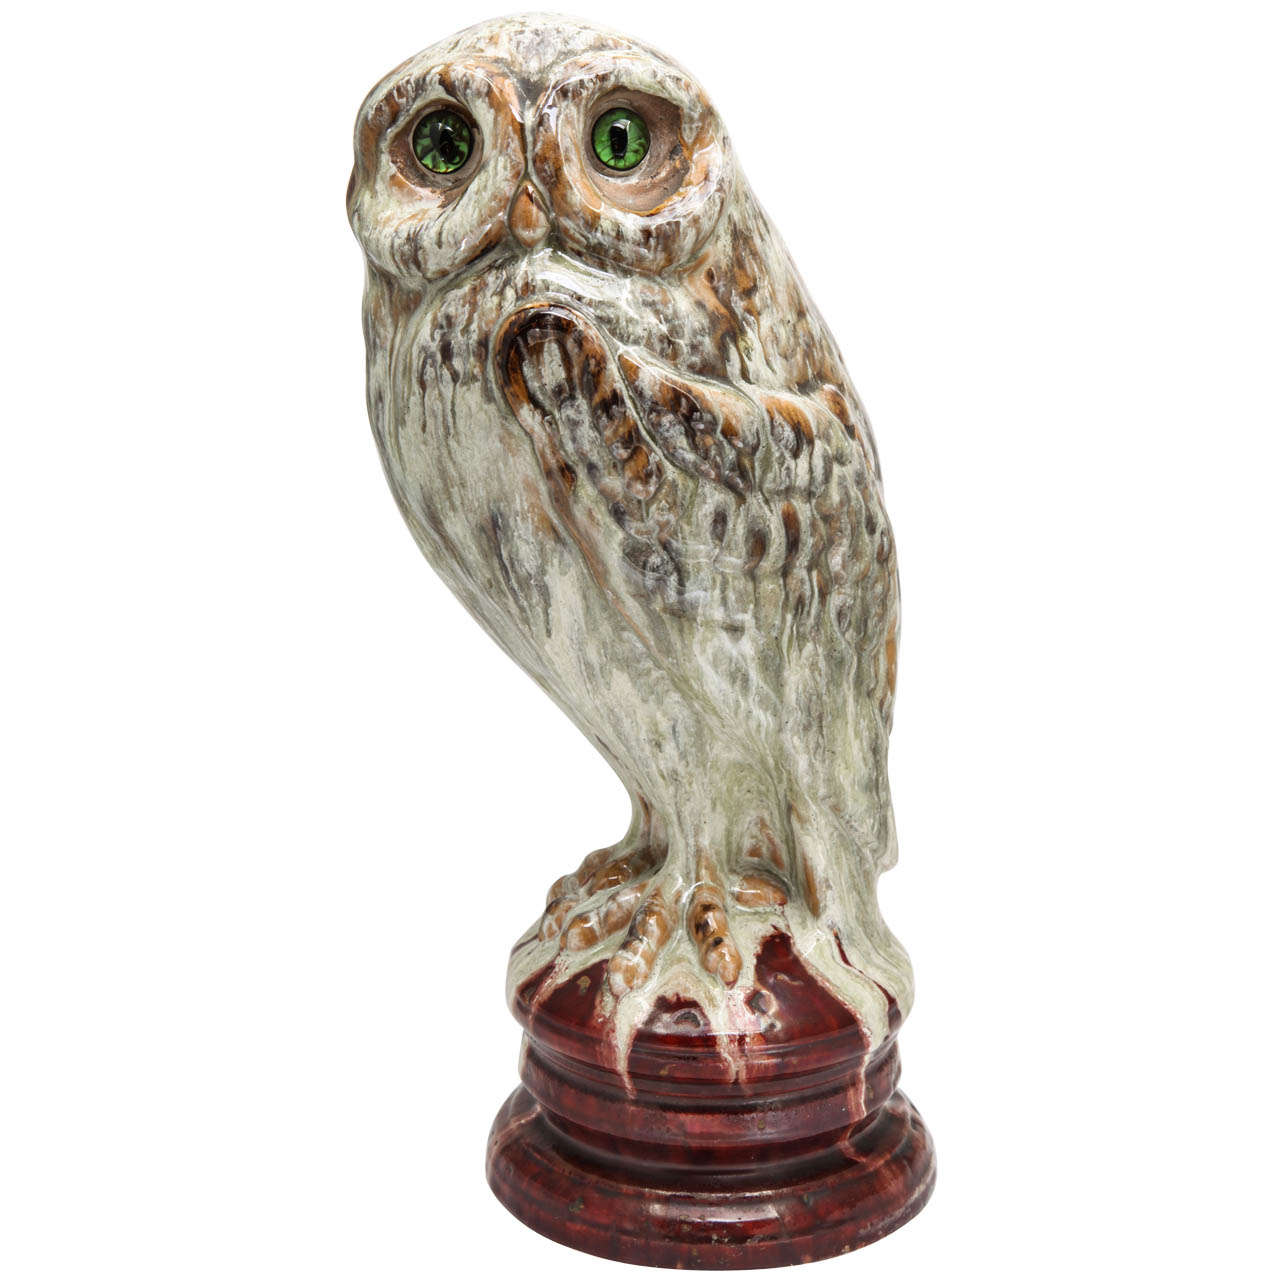 A Rare Signed Emile Galle Faience Owl For Sale